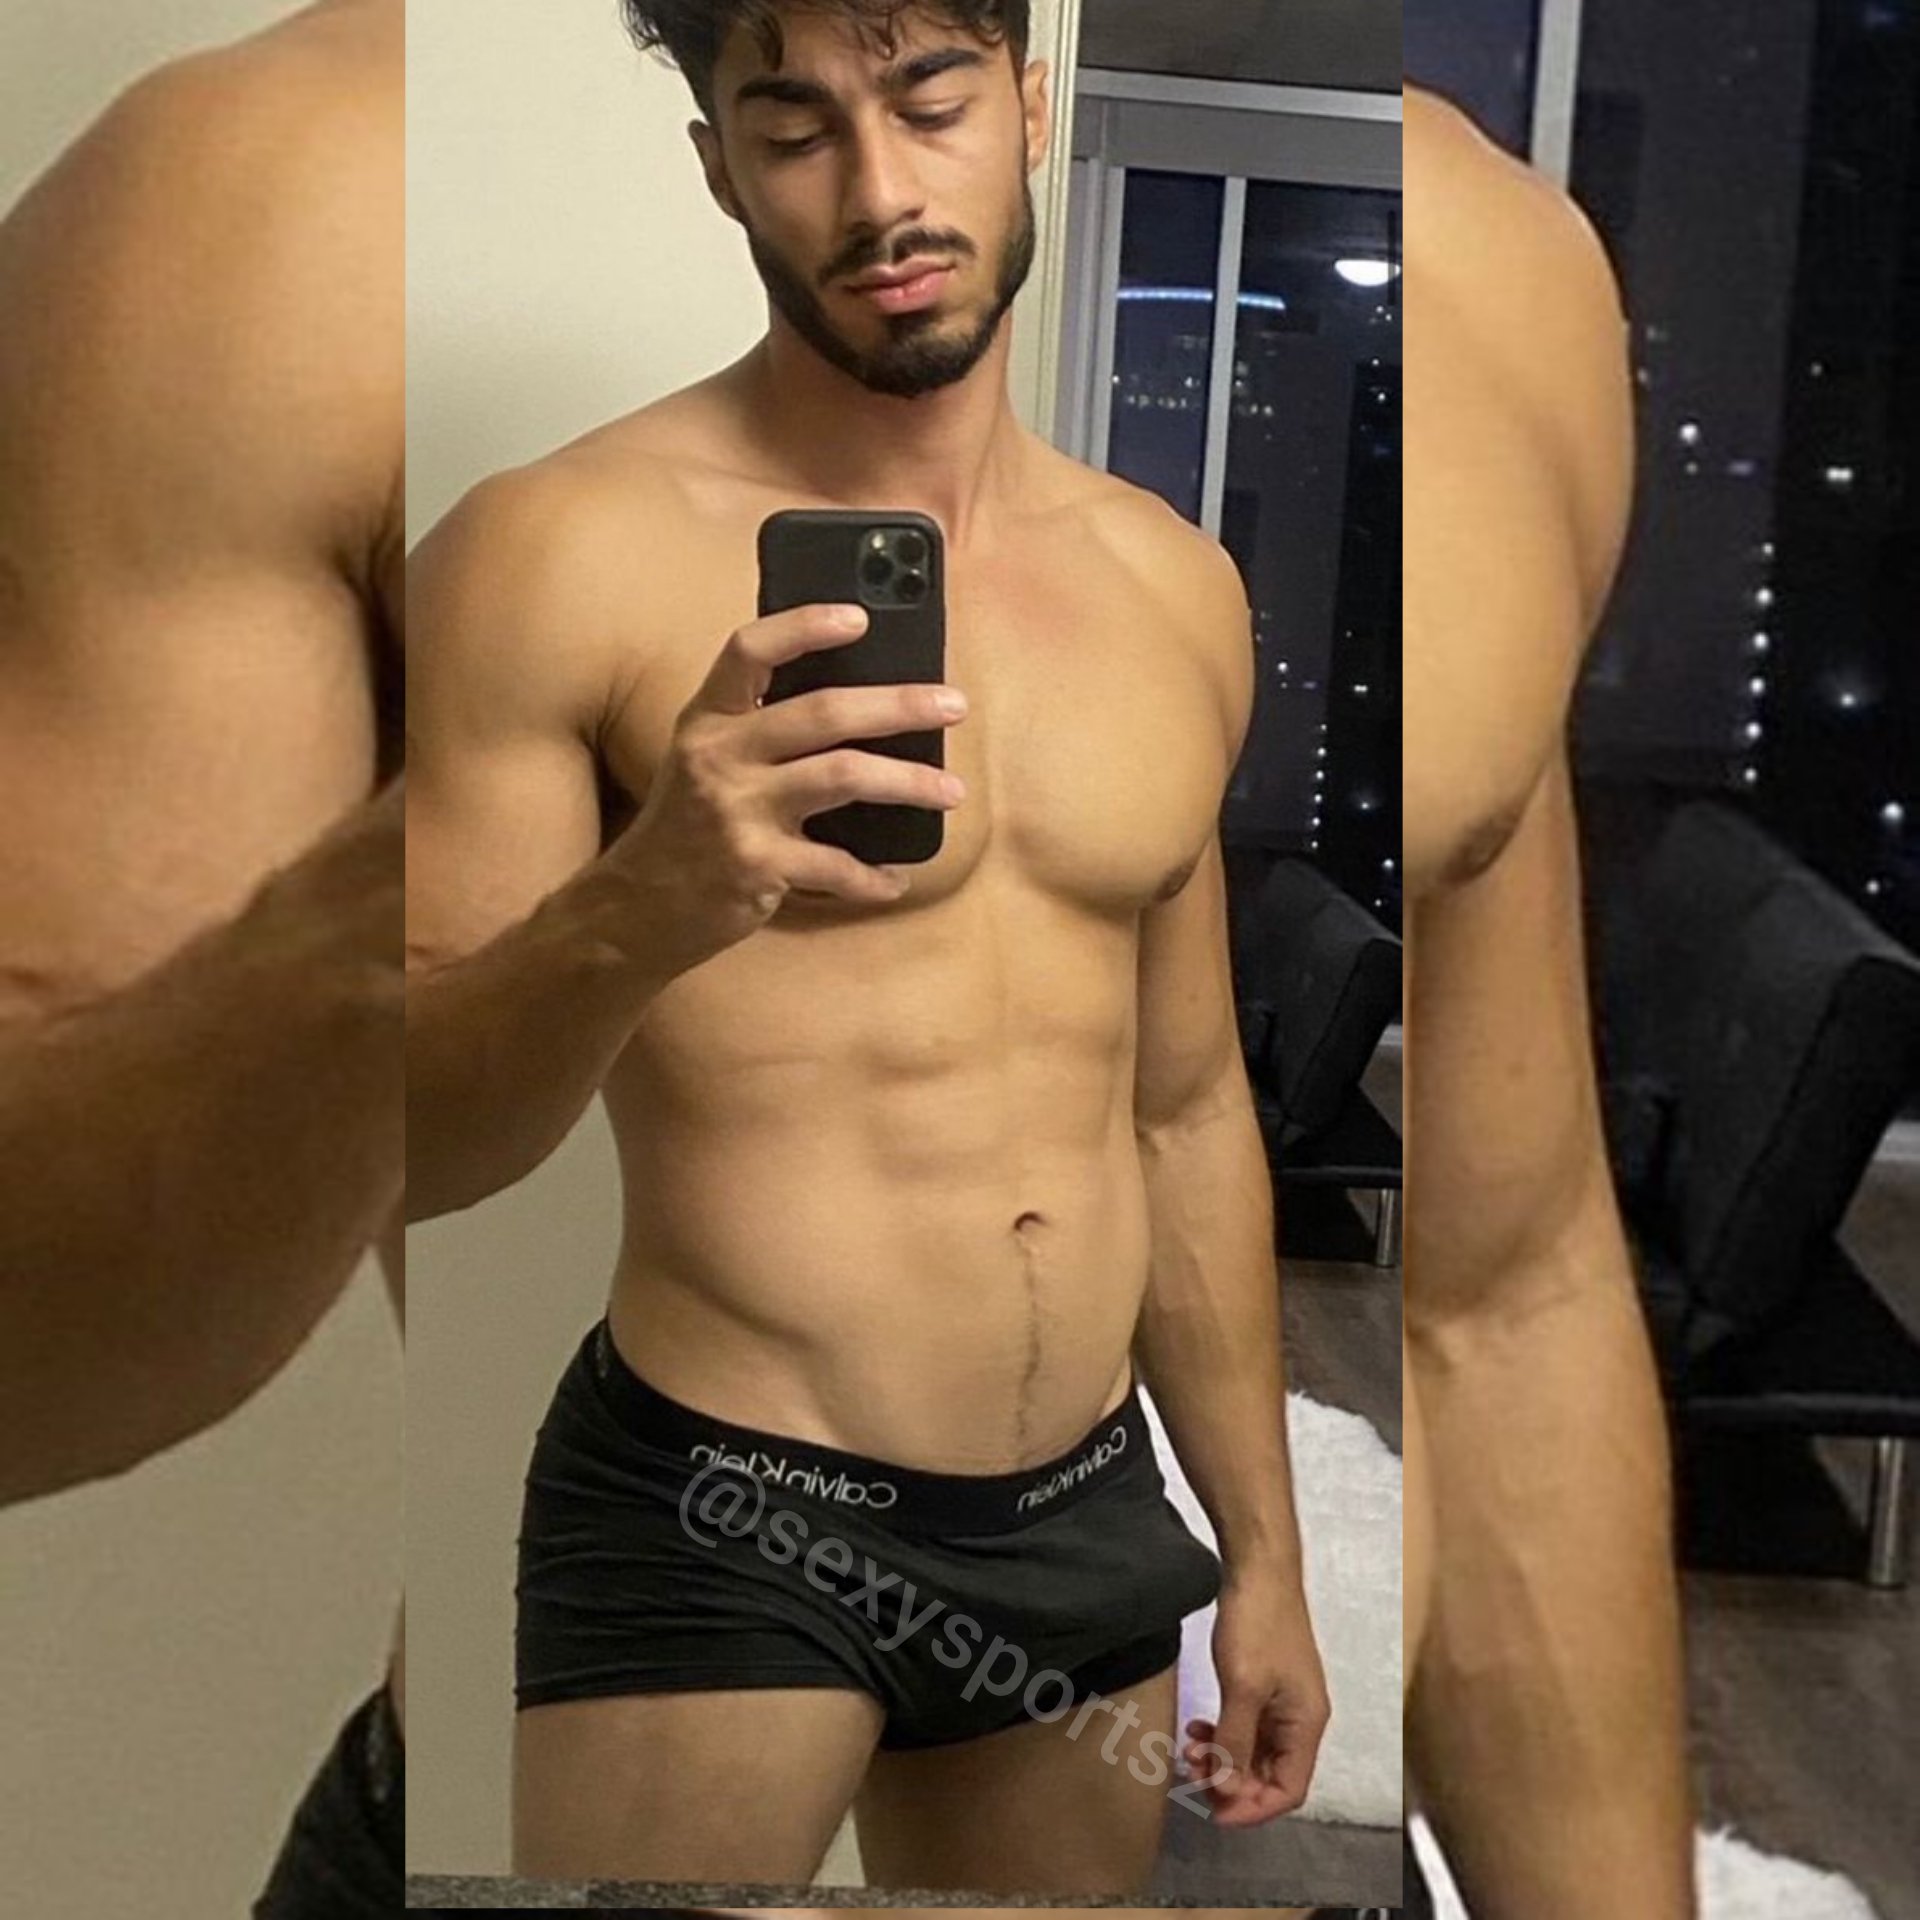 How To Promote Onlyfans On Instagram?